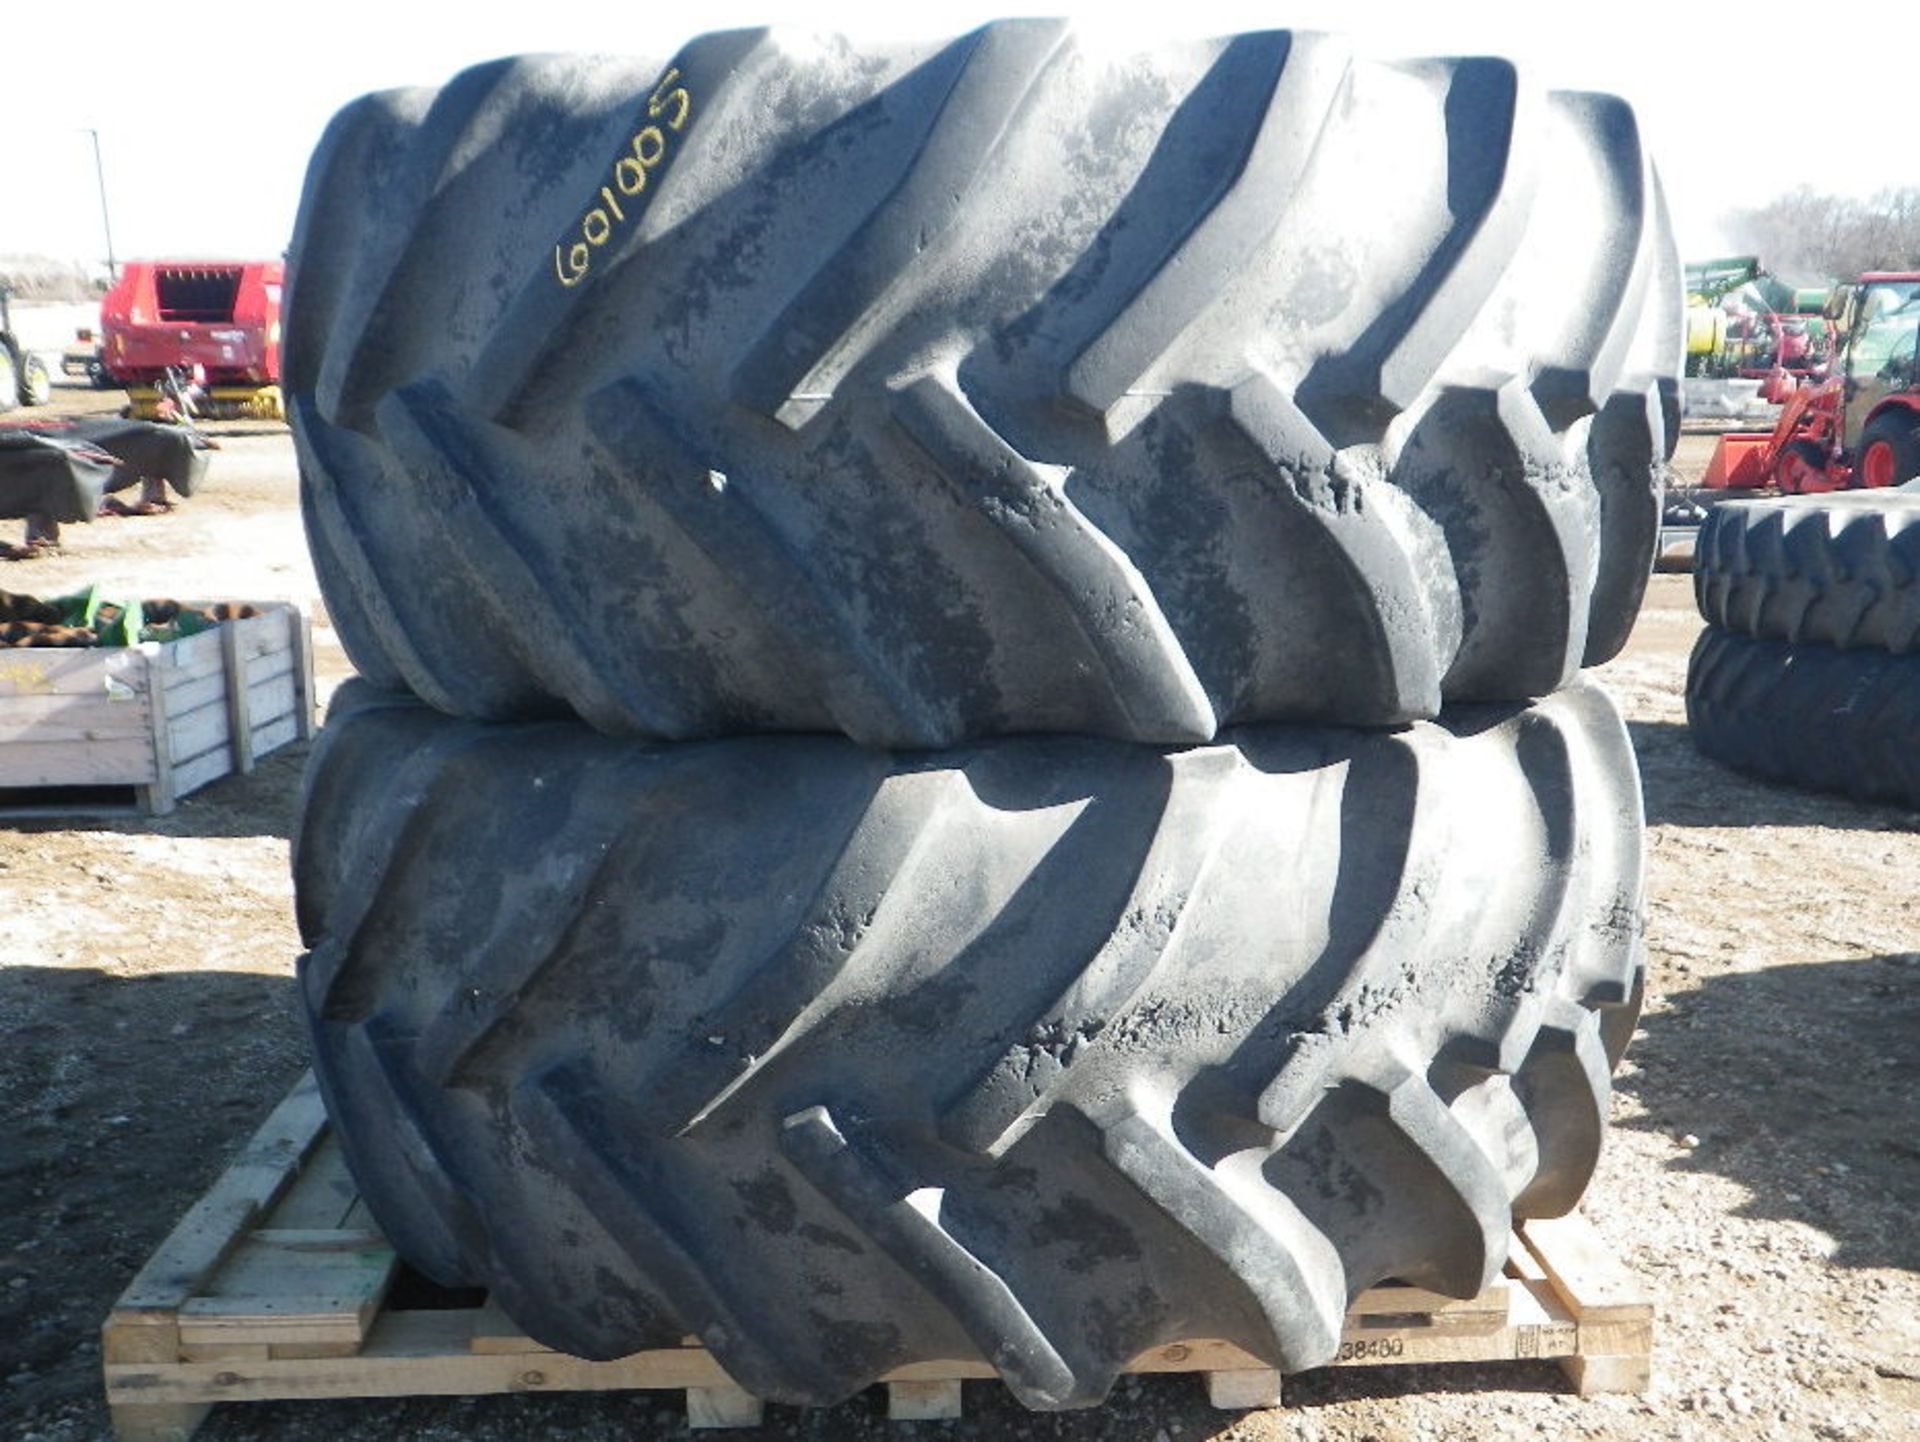 (30) 1 PAIR GY 800/70R38 SUPER TRACTION RADIAL COMBINE TIRES W/STUBBLE DAMAGE - TIRES ONLY